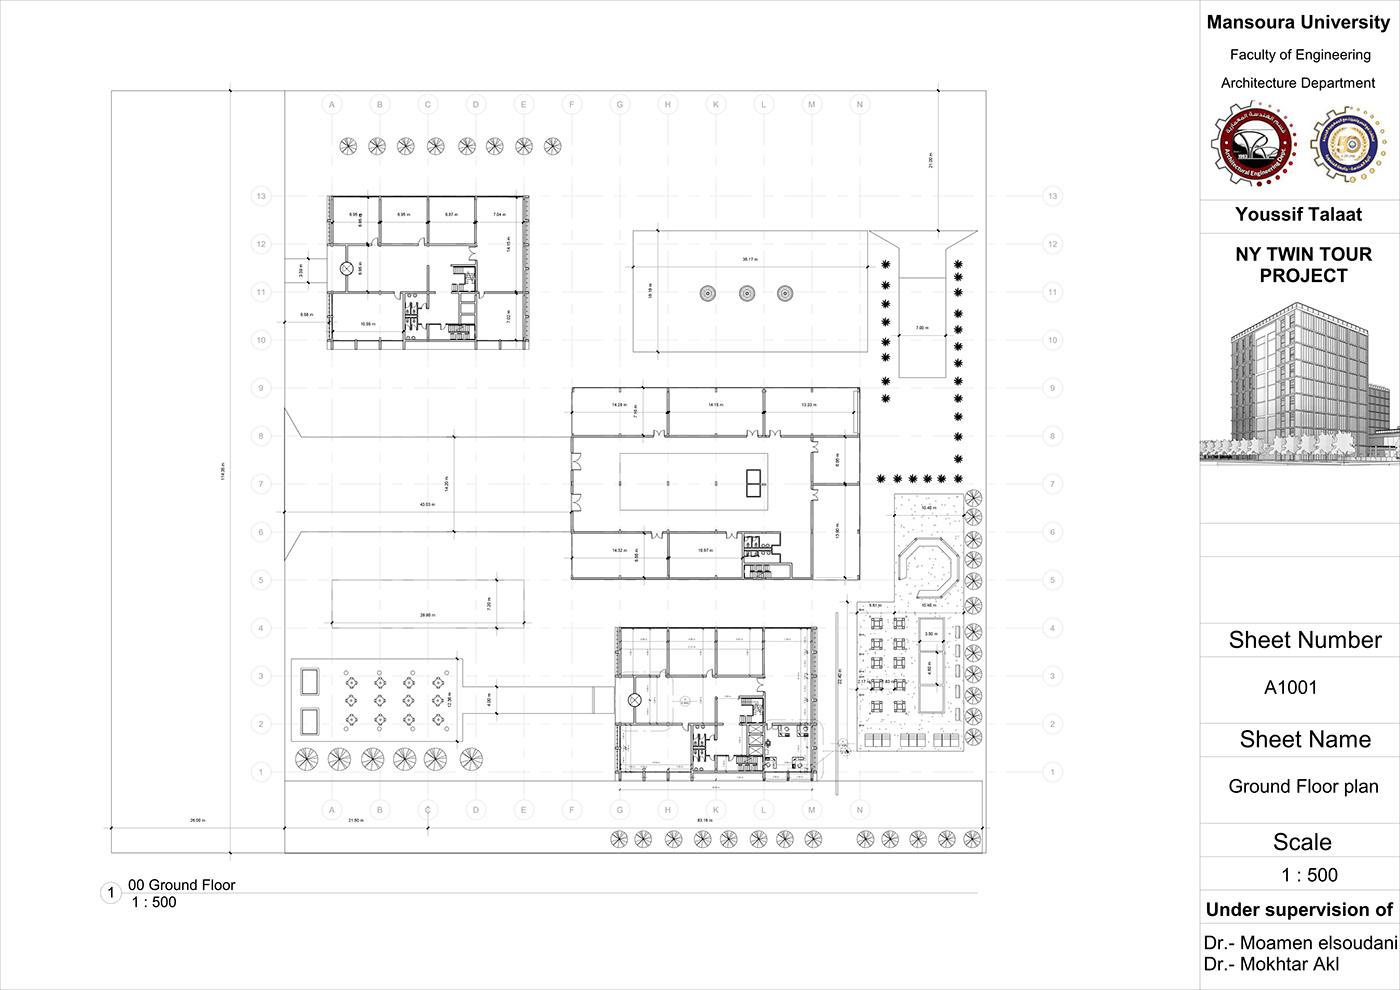 revit administrative design Aechitecture   Project working drawings technical drawing building exterior 3D